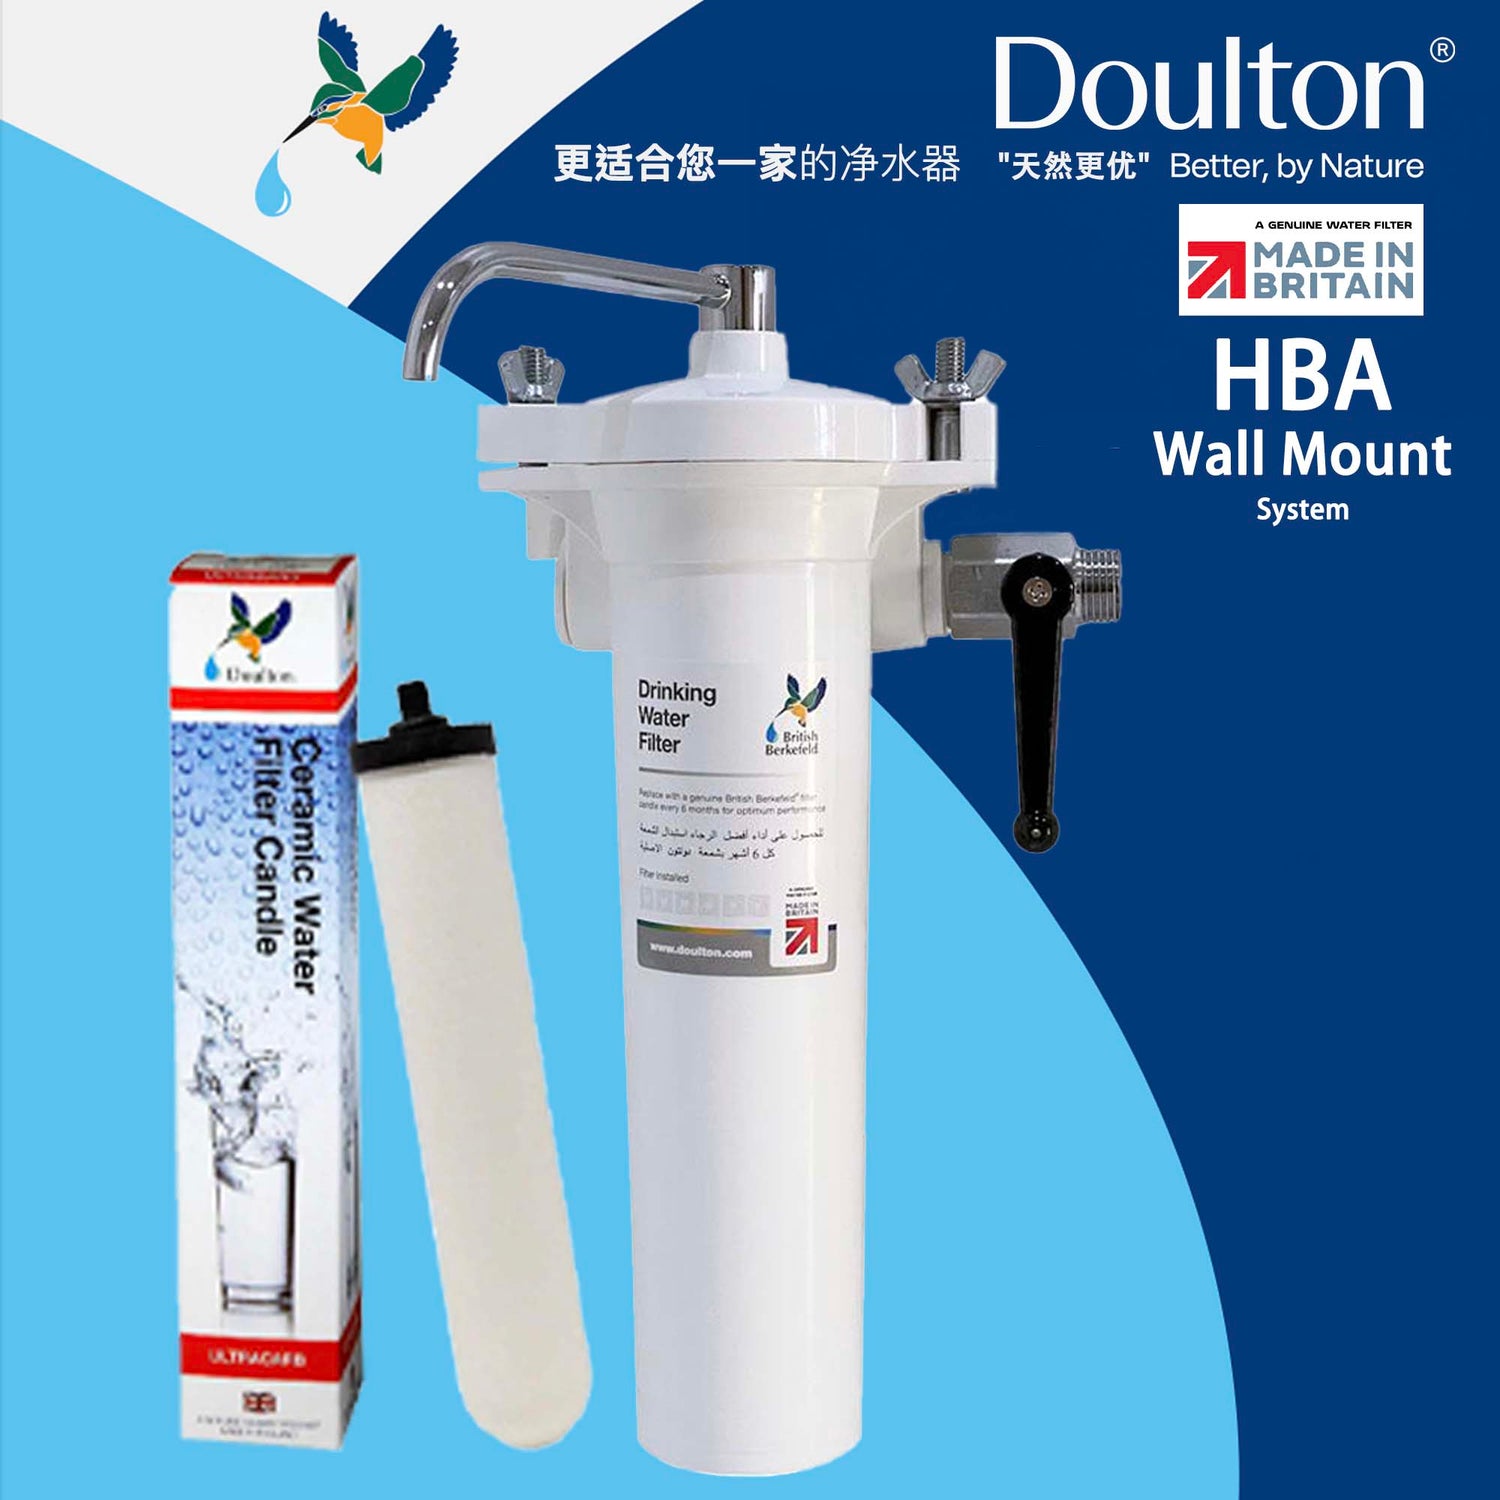 Doulton Wall Mount Water Filter British Berkefeld HBA MKII Wall Mount With Sterasyl Water Filter Water Purifier Made in Britain since 1826